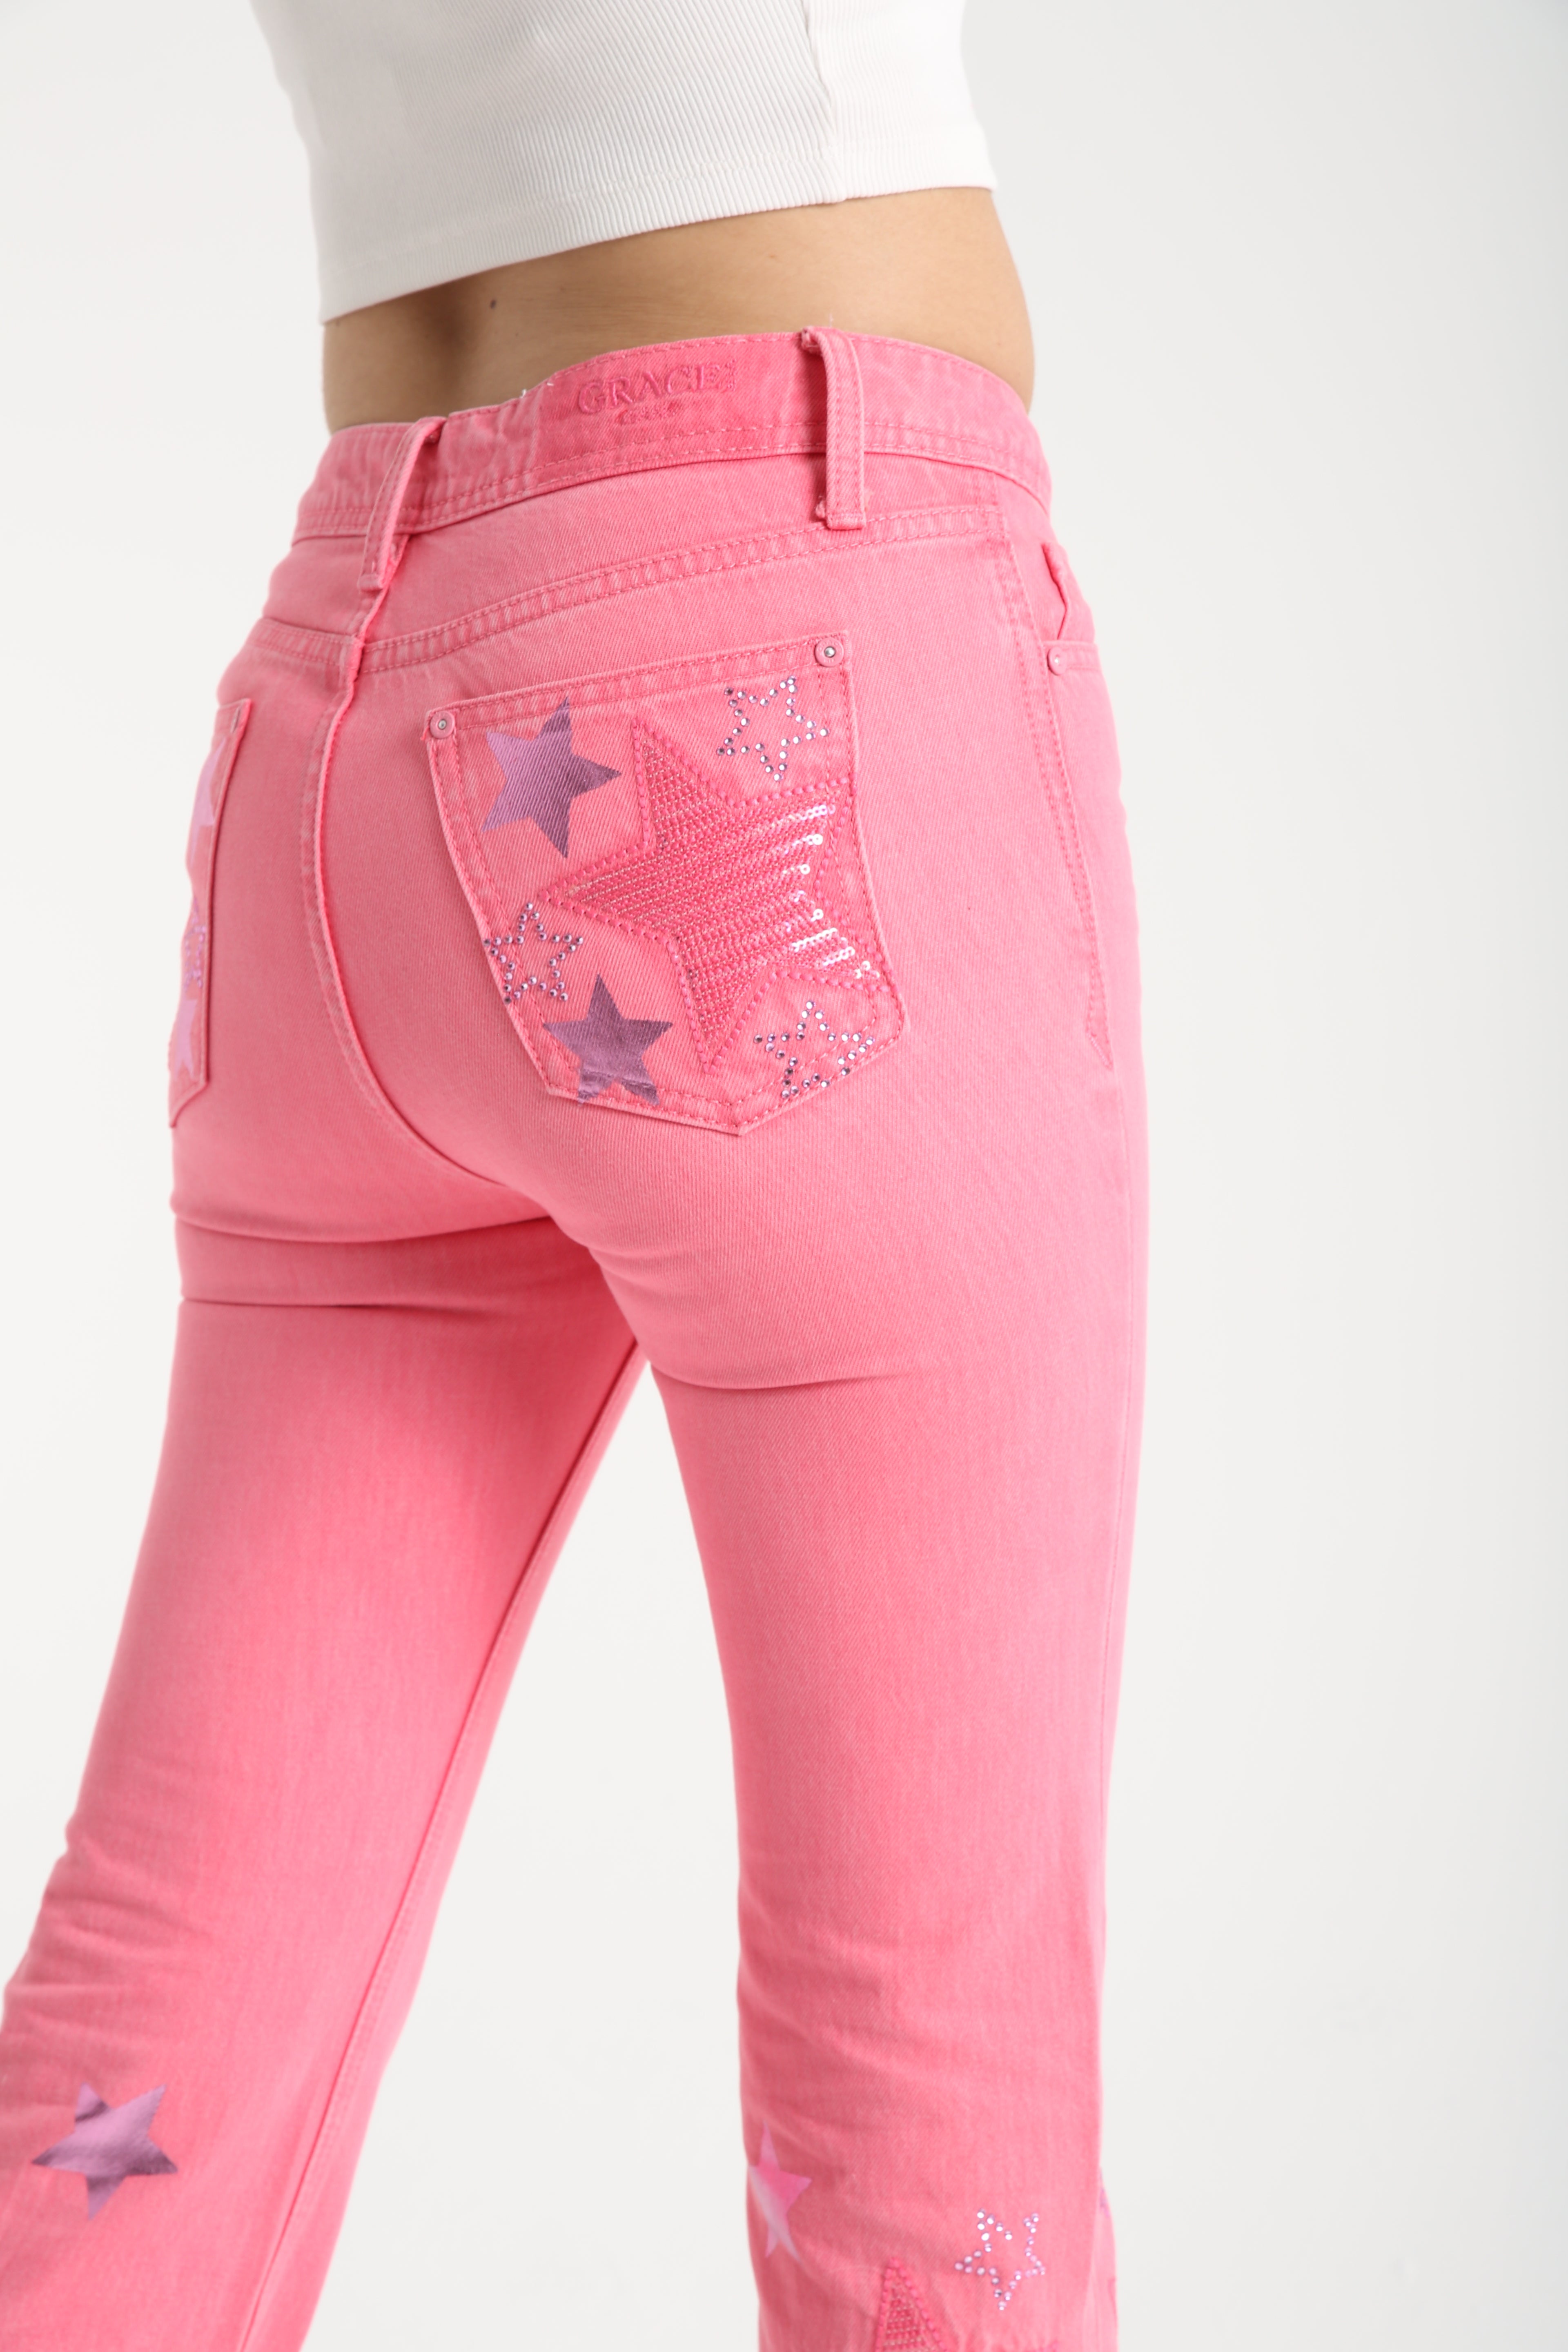 Stars Embroidered Pink High Rise Flare Jeans